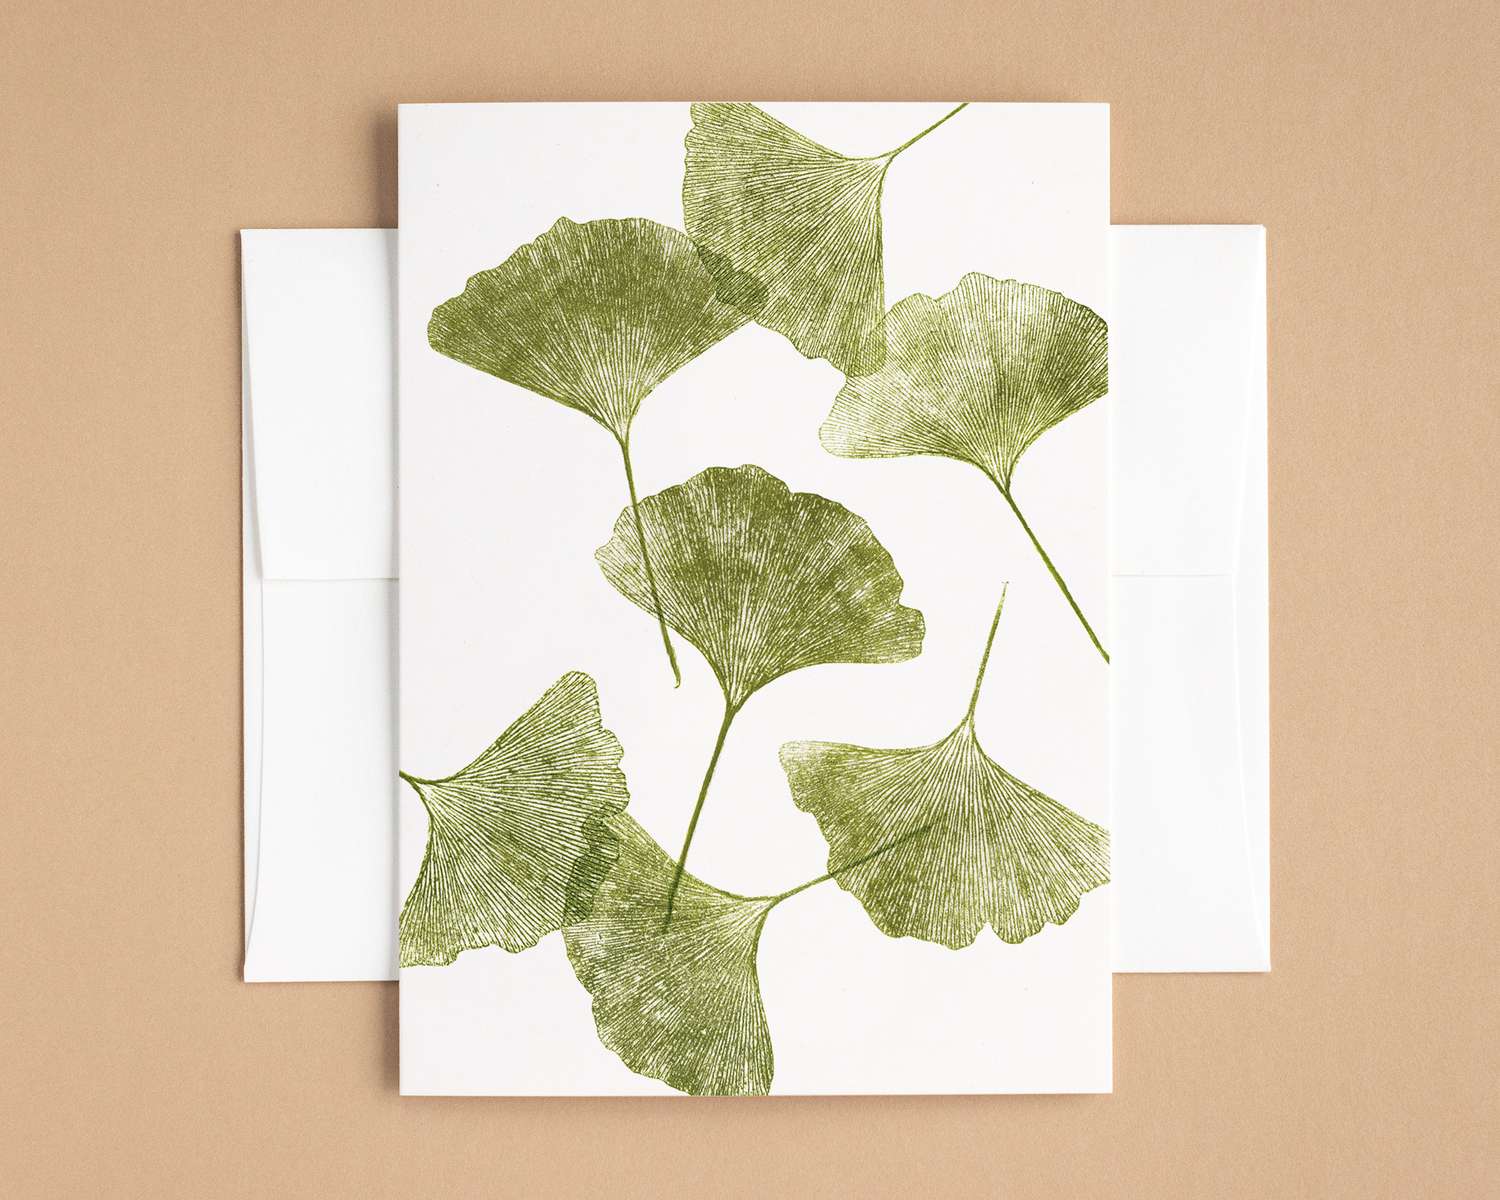 Seven green ginkgo leaves are scattered across the surface of a vertical white greeting card. The card sits on top of a white envelope, which lies on a brown backdrop.